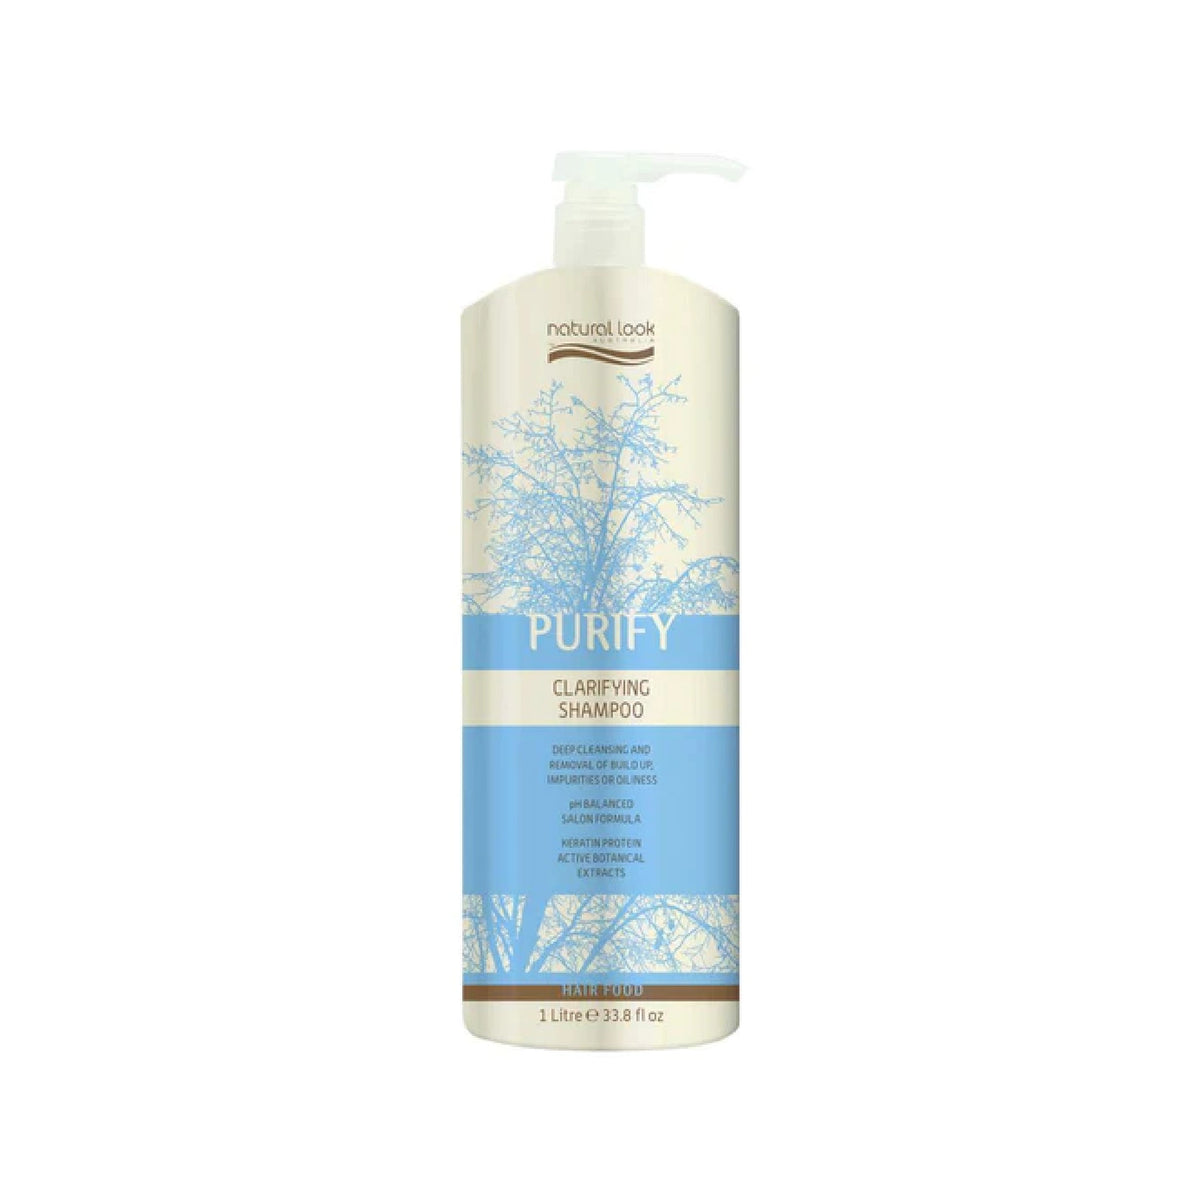 Natural Look Purify Clarifying Shampoo 1Ltr - Haircare Superstore